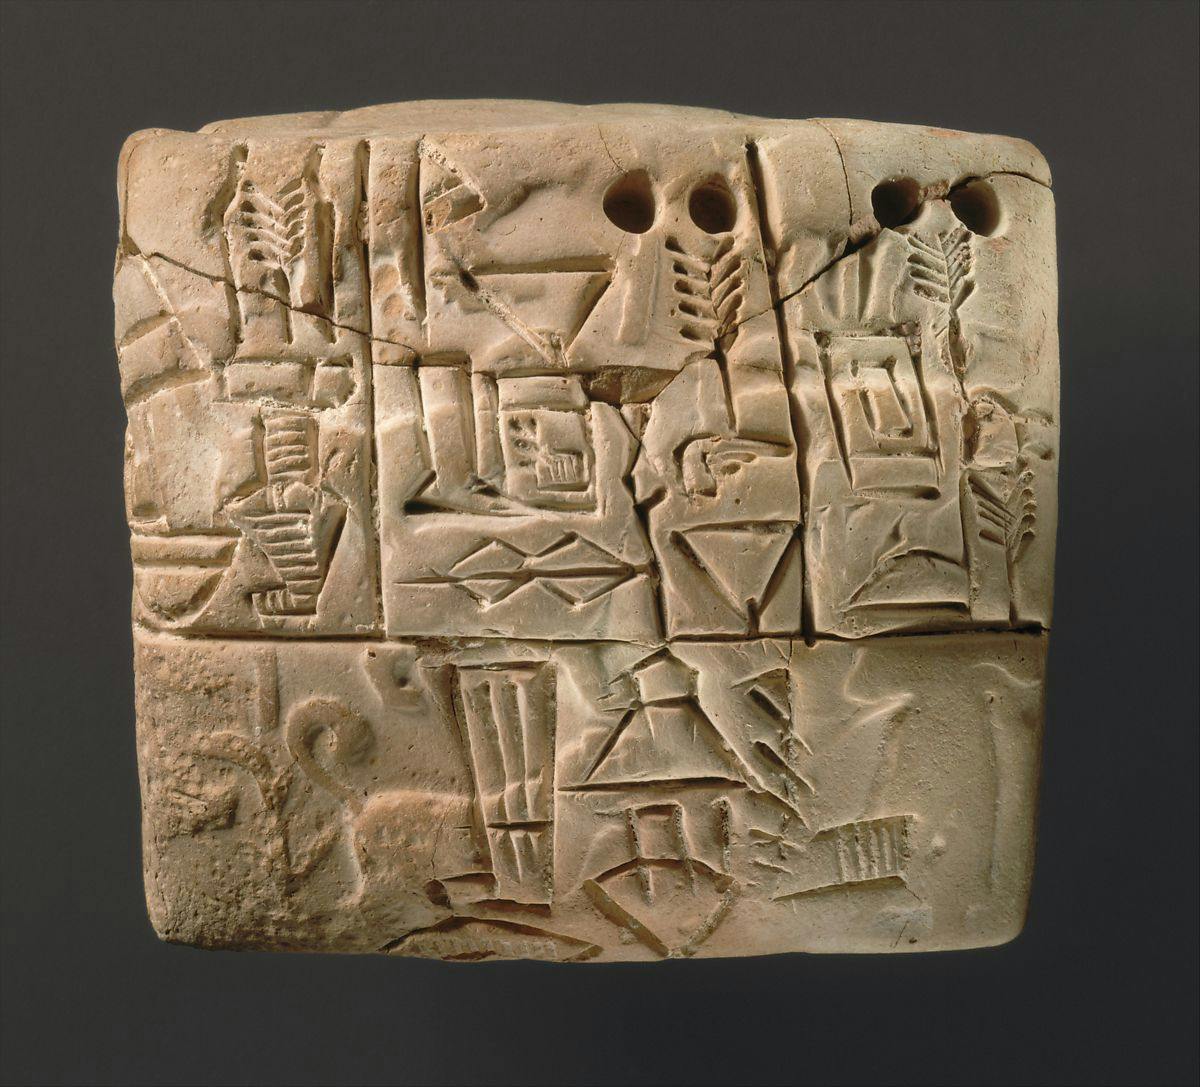 Tablet account of barley distribution with a male figure, hunting dogs, and boars (circa 3100–2900 B.C.)